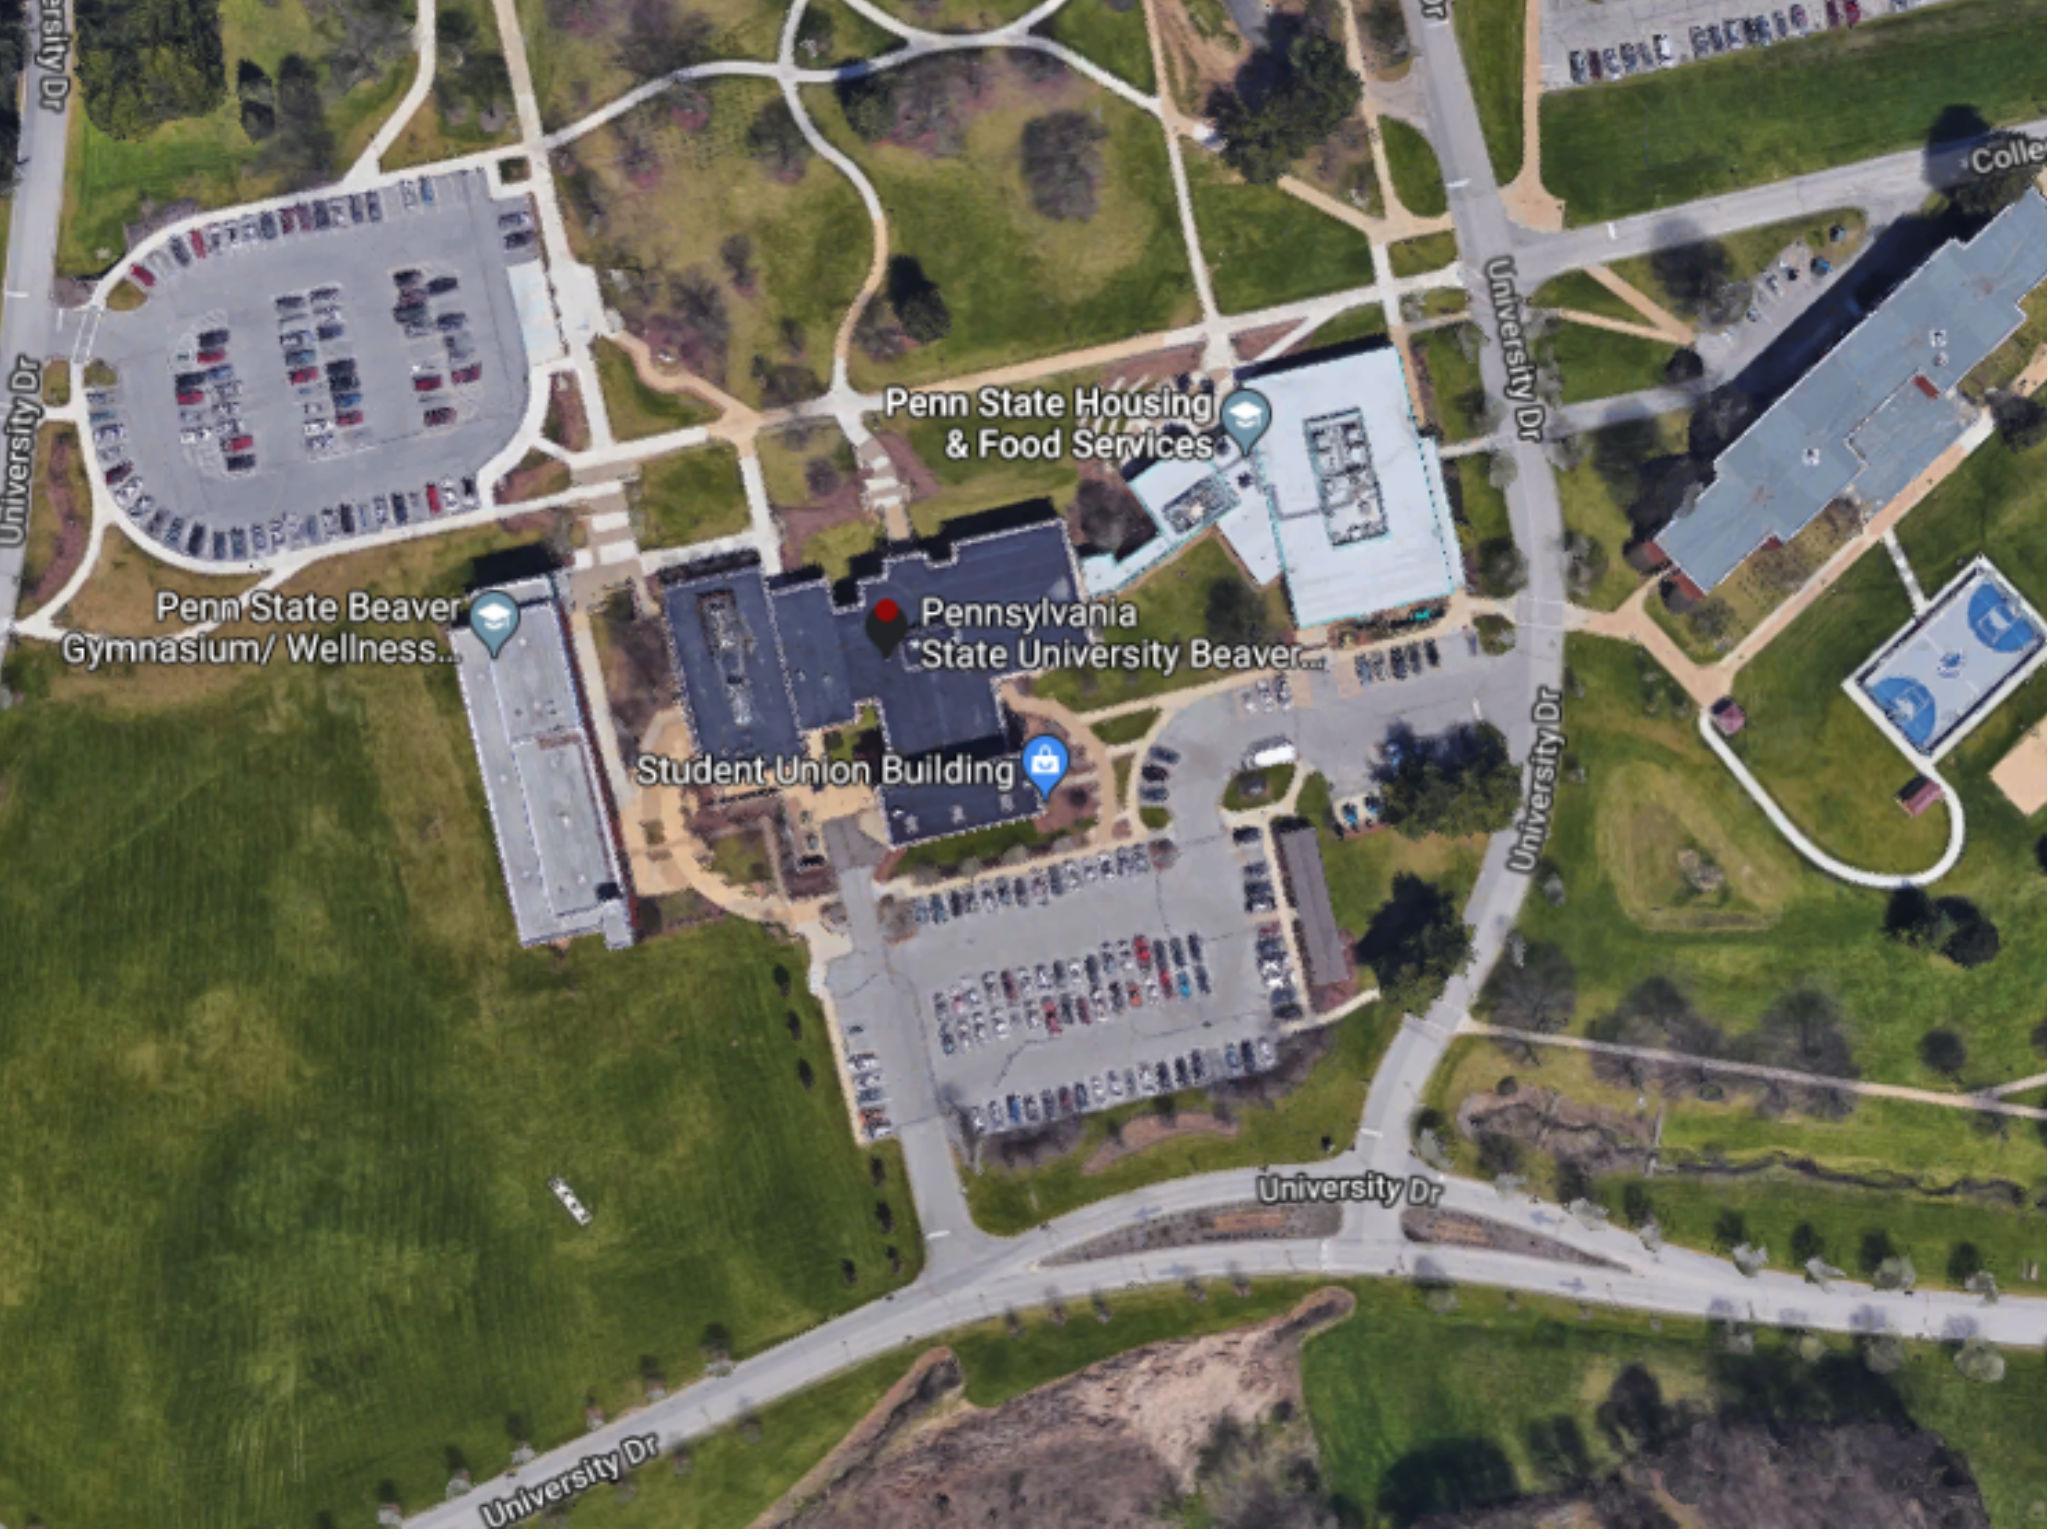 penn-state-shooting-two-dead-after-shooter-opens-fire-at-university-s-beaver-campus-say